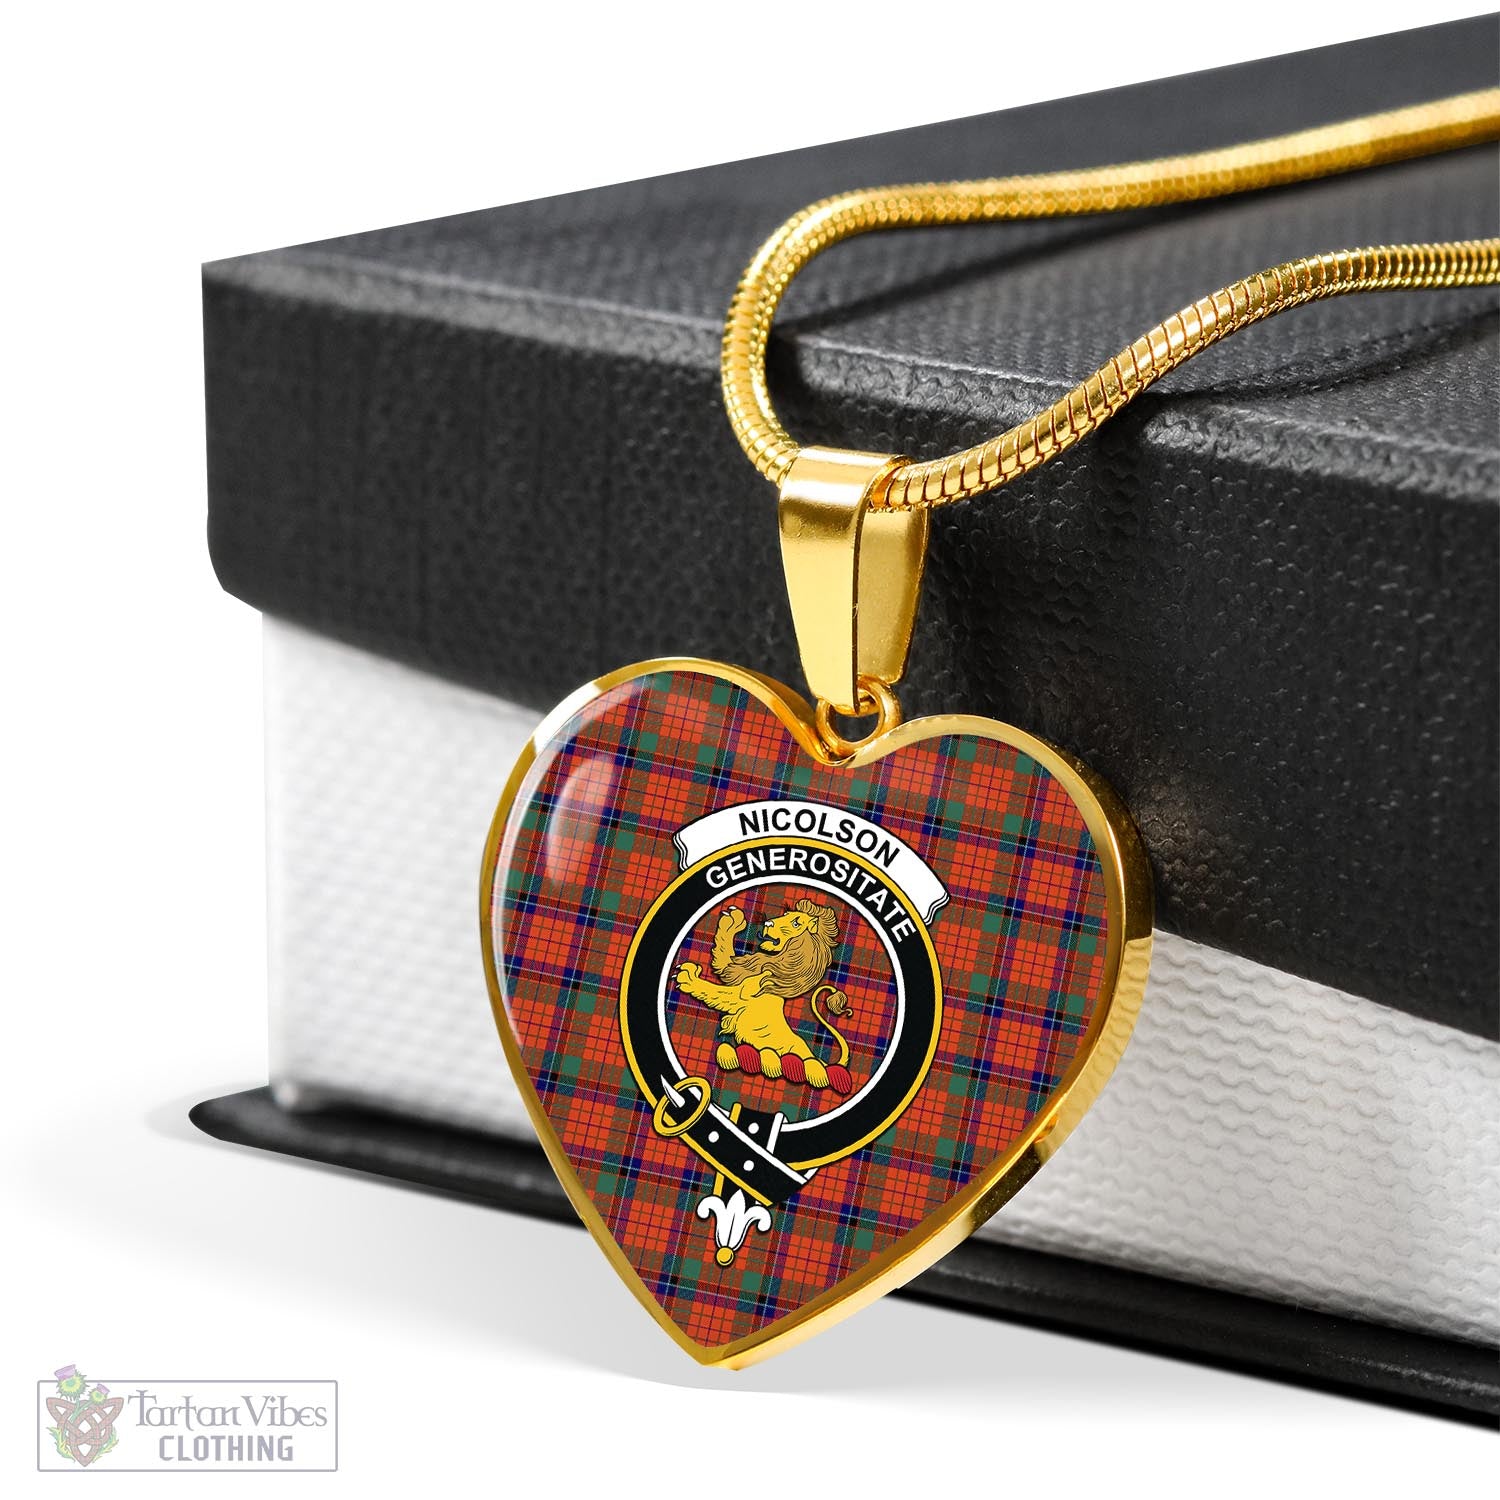 Tartan Vibes Clothing Nicolson Ancient Tartan Heart Necklace with Family Crest